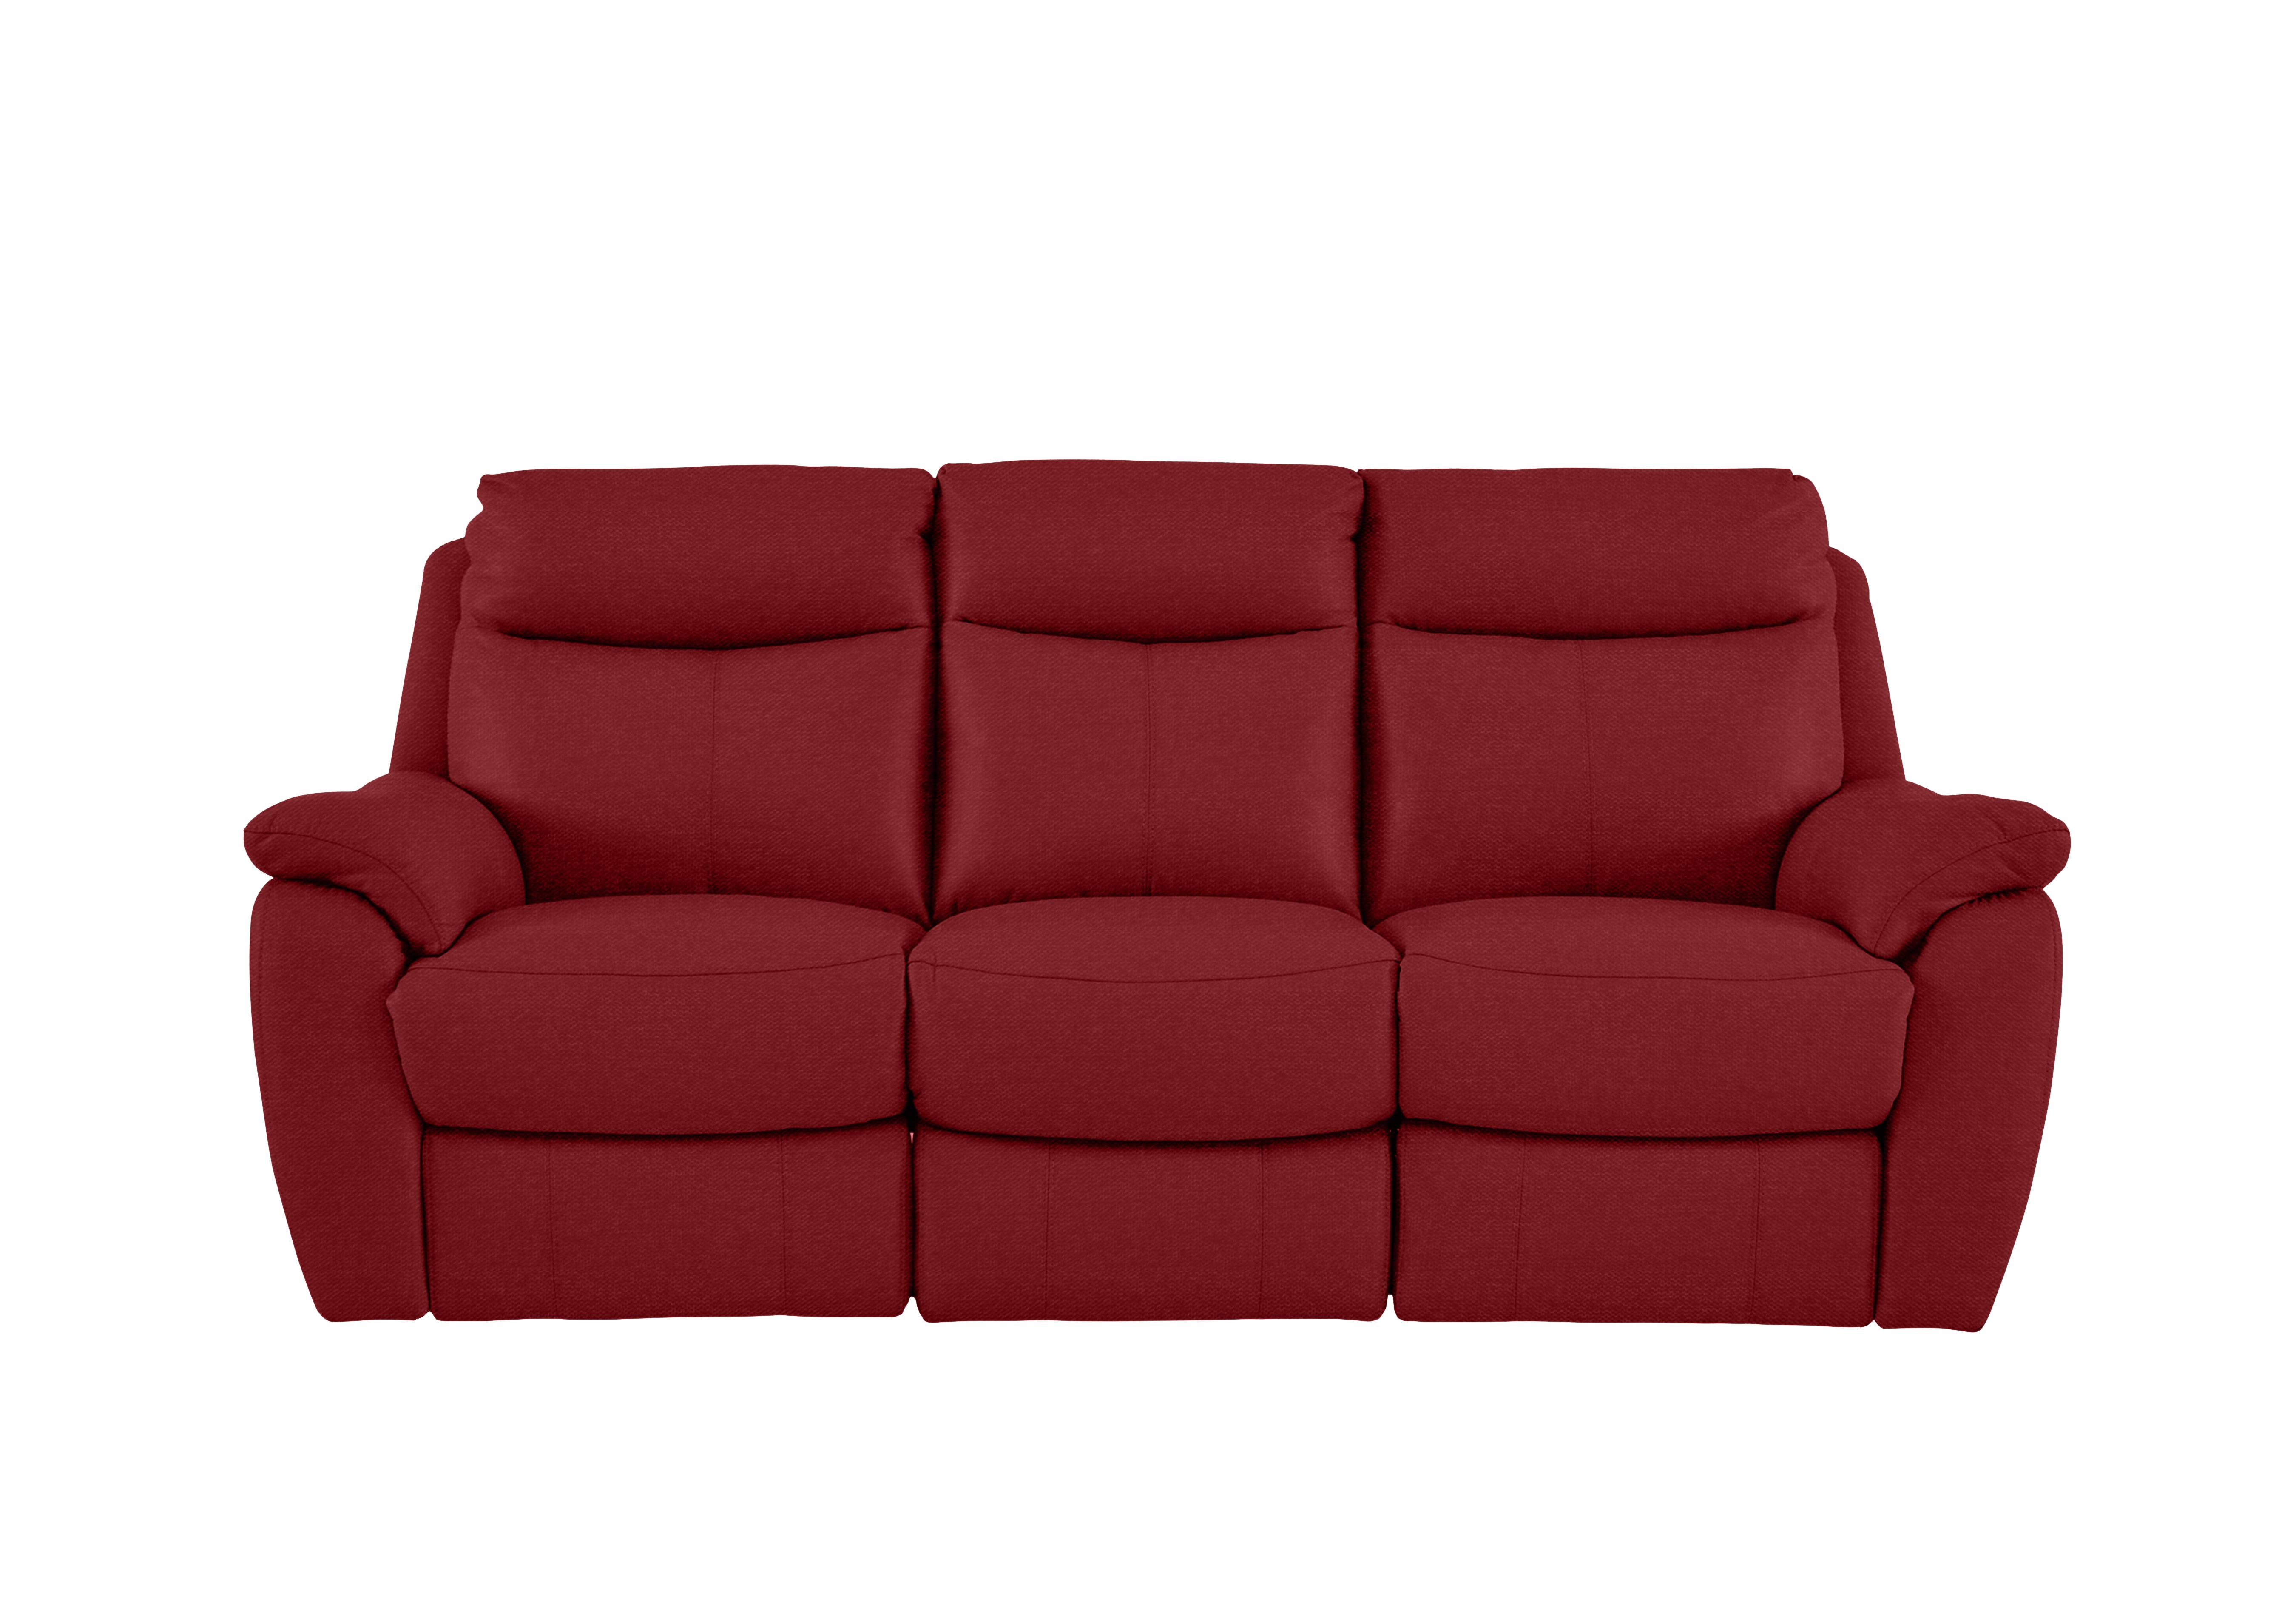 Snug 3 Seater Fabric Sofa in Fab-Blt-R29 Red on Furniture Village